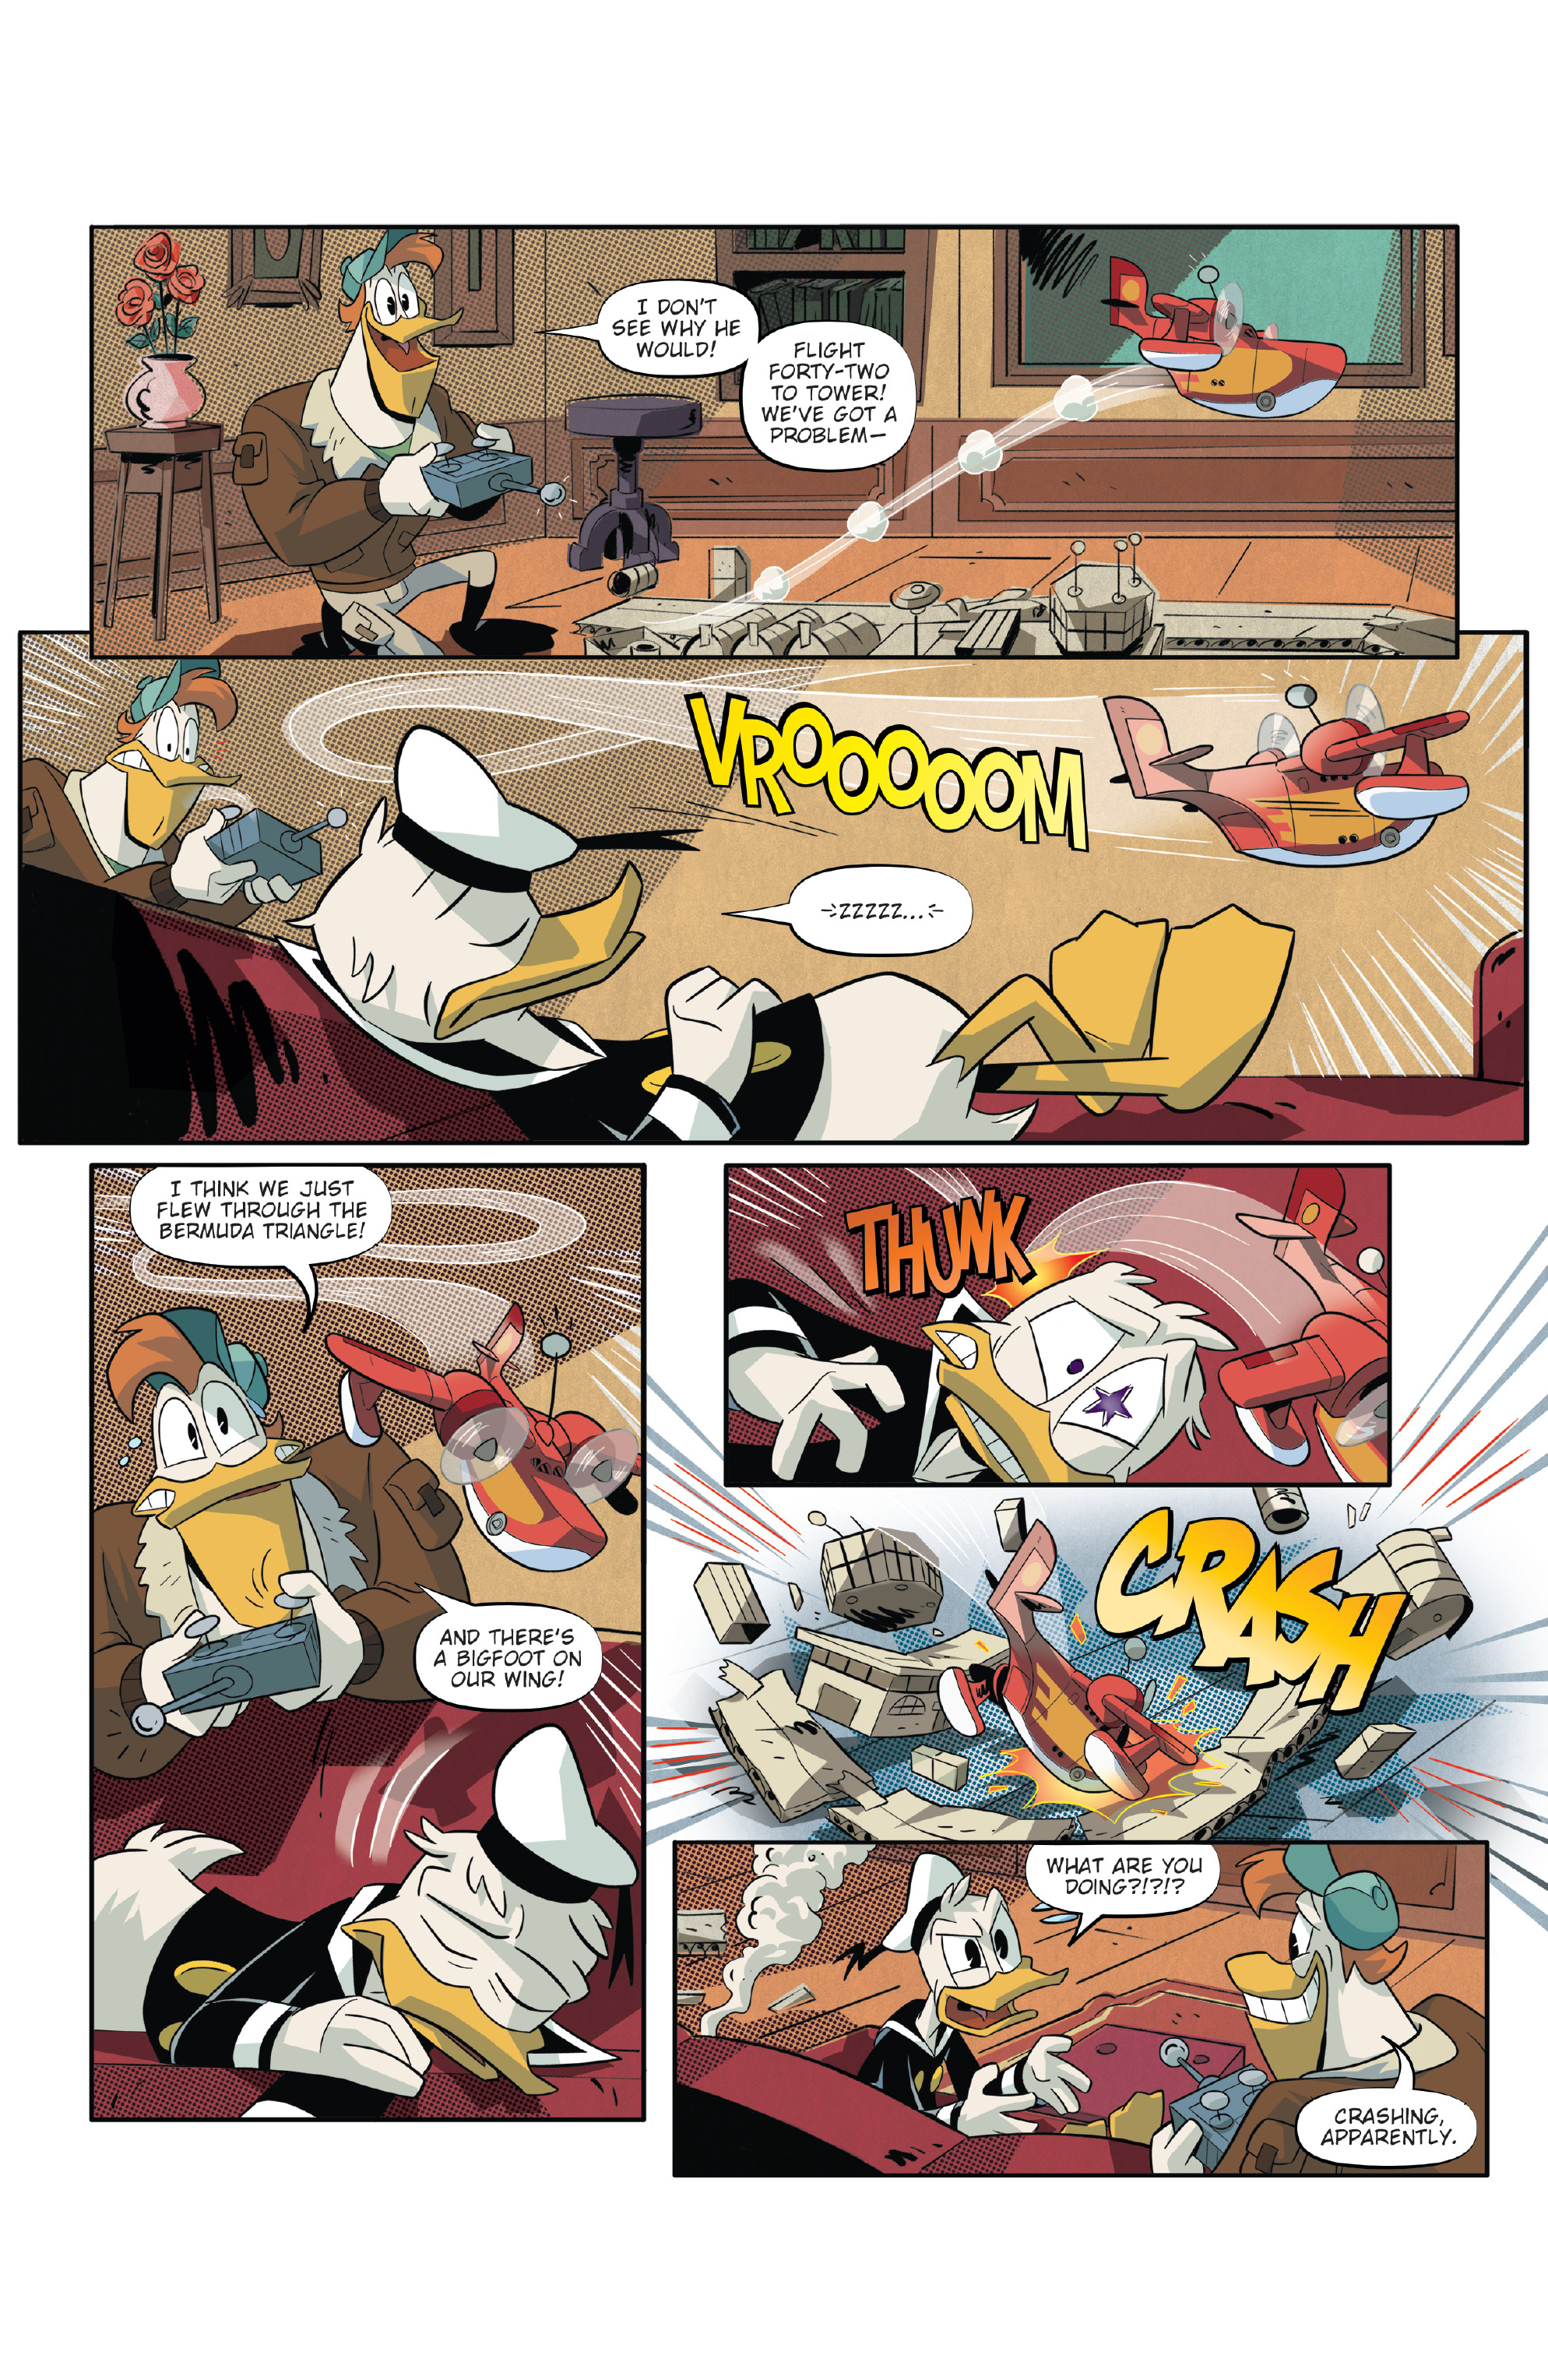 DuckTales: Silence & Science (2019-): Chapter 1 - Page 6